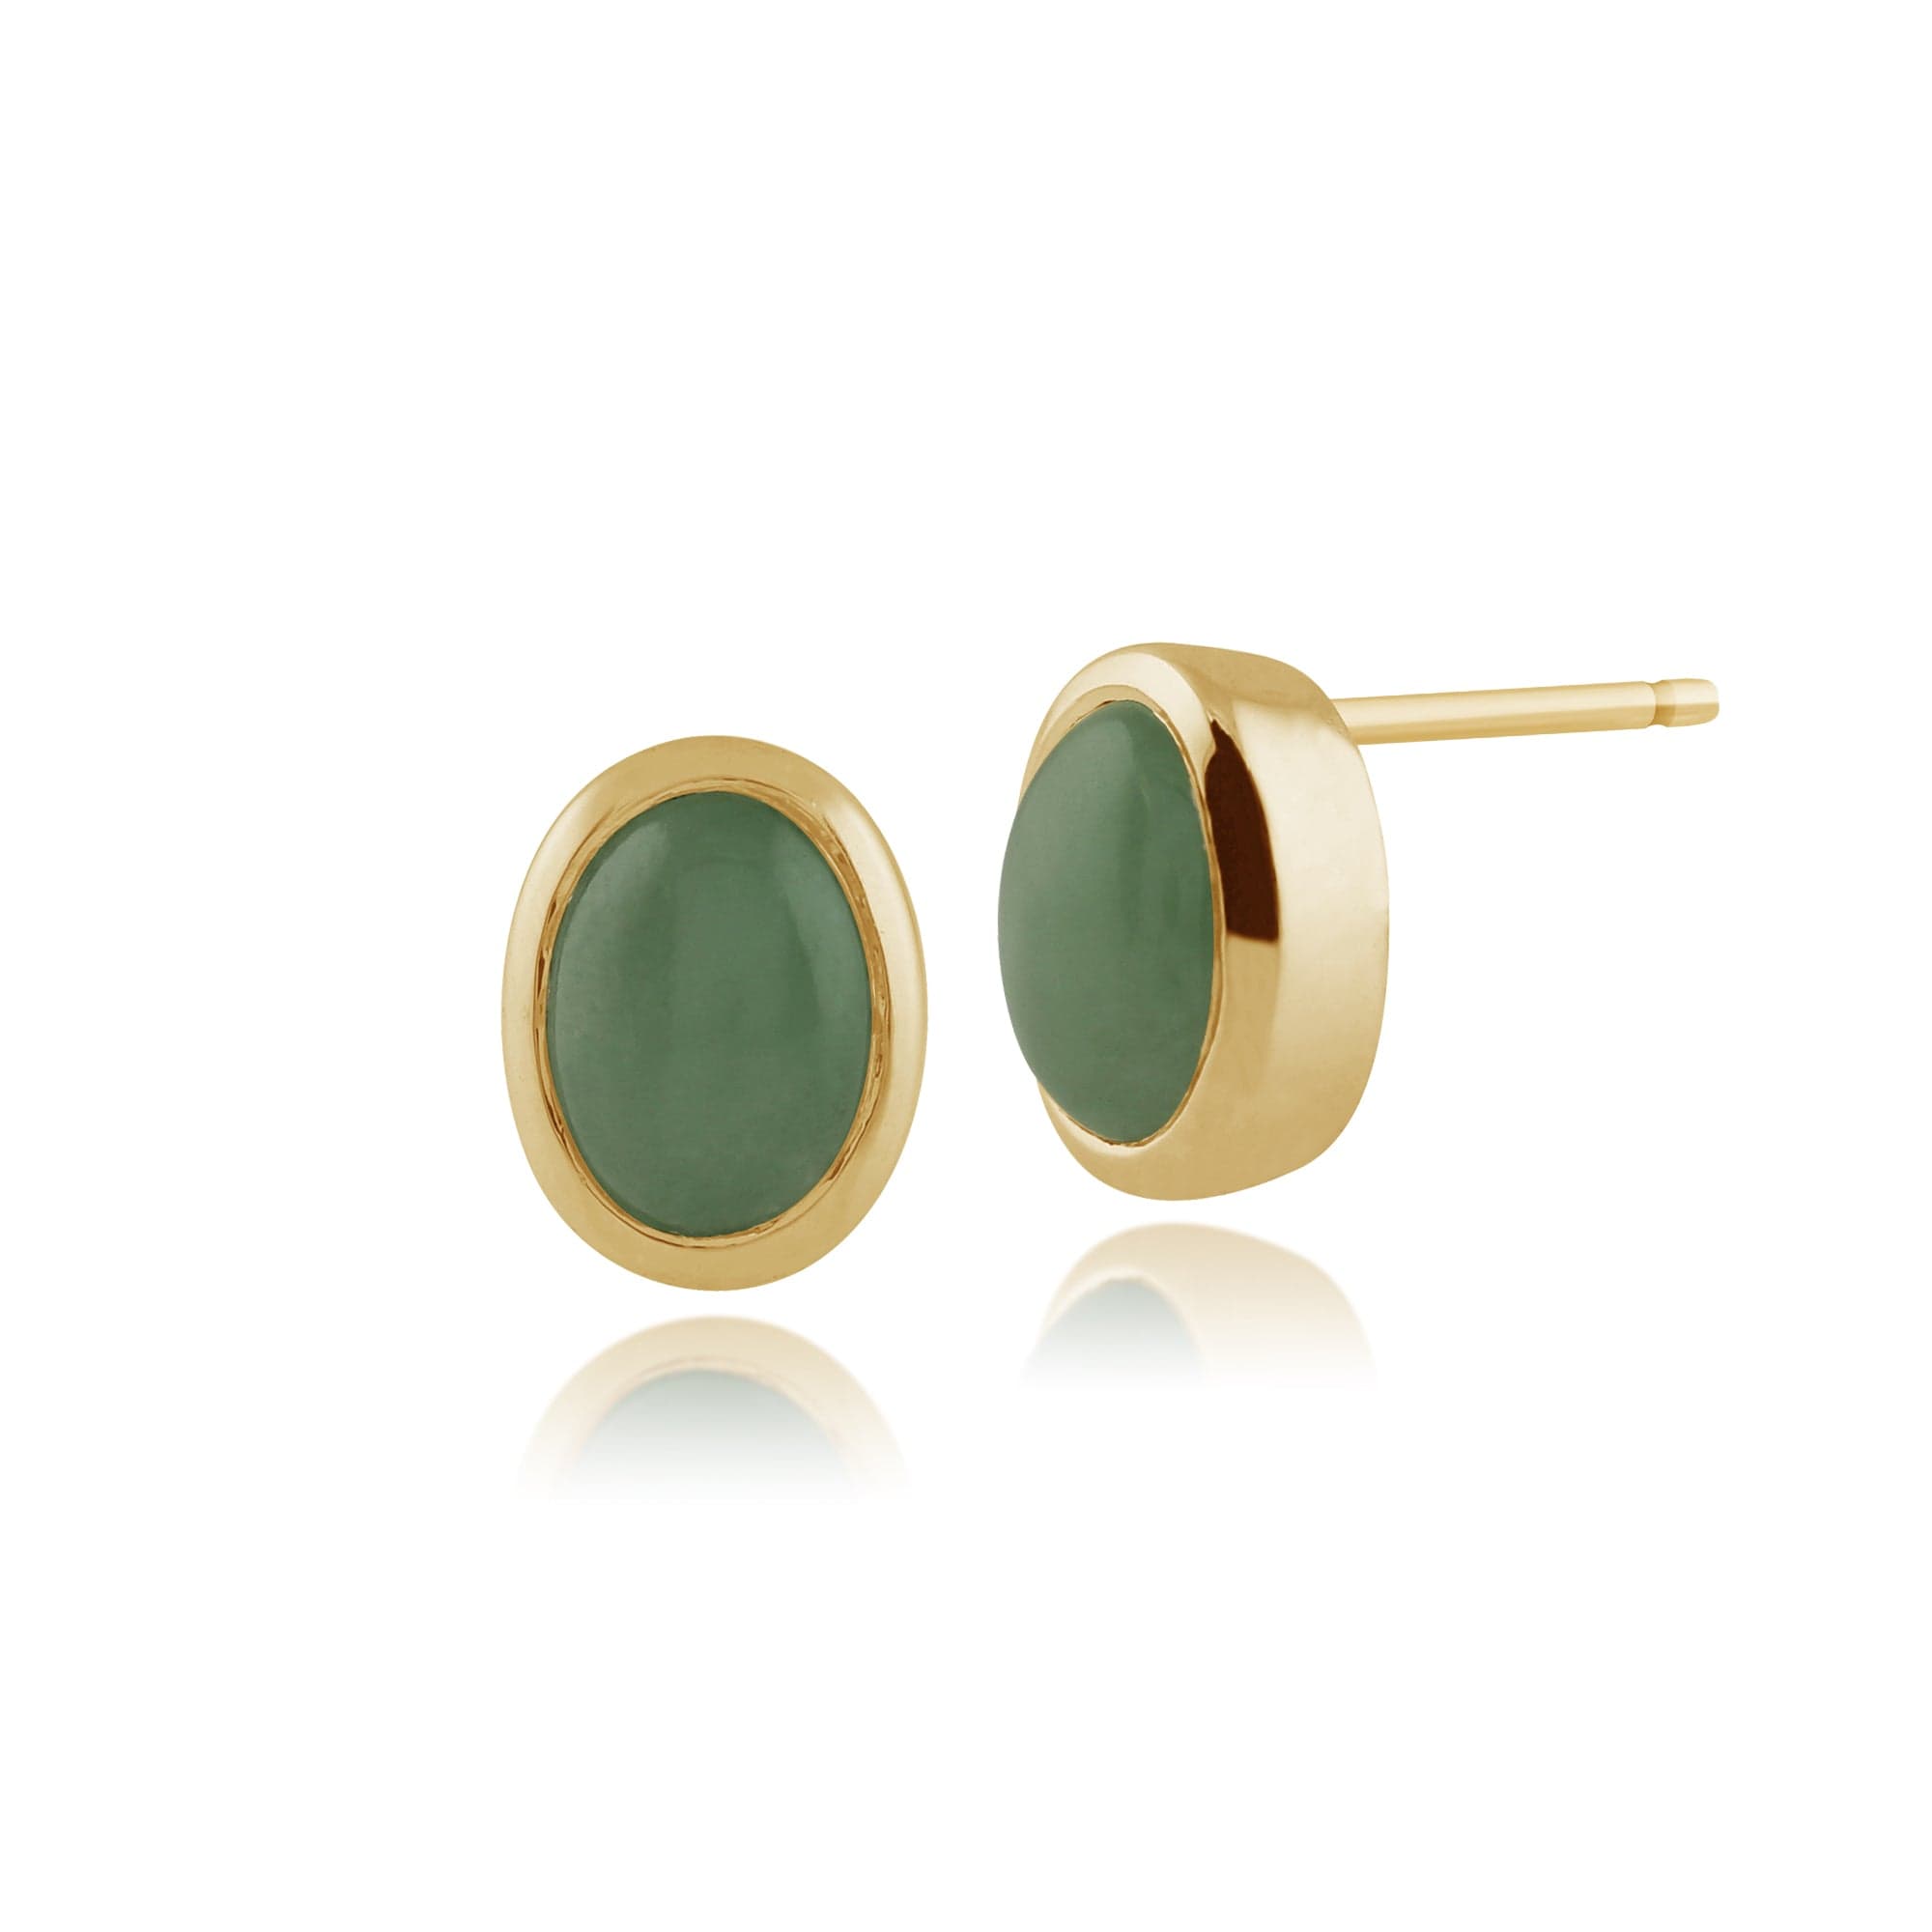 Classic Oval Jade Cabochon Stud Earrings in 9ct Yellow Gold 7x6mm - Gemondo